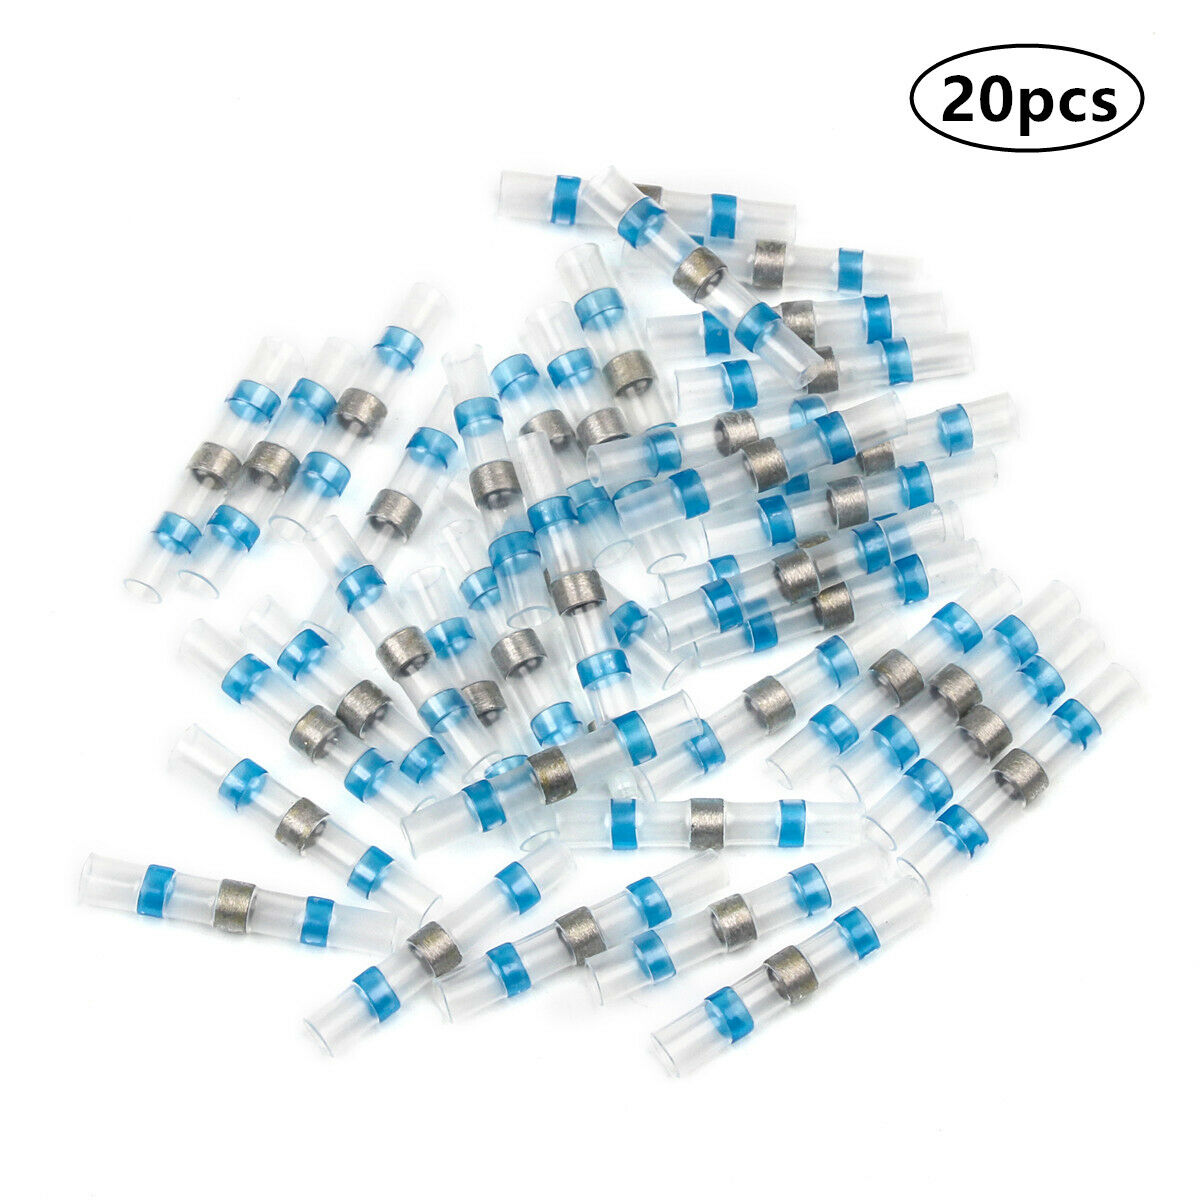 20PCS Heat Shrink Soldering Seal Sleeve Insulated Waterproof Electrical Butt Wire Connectors Soldered Terminals For 1.5-2.5 mm2